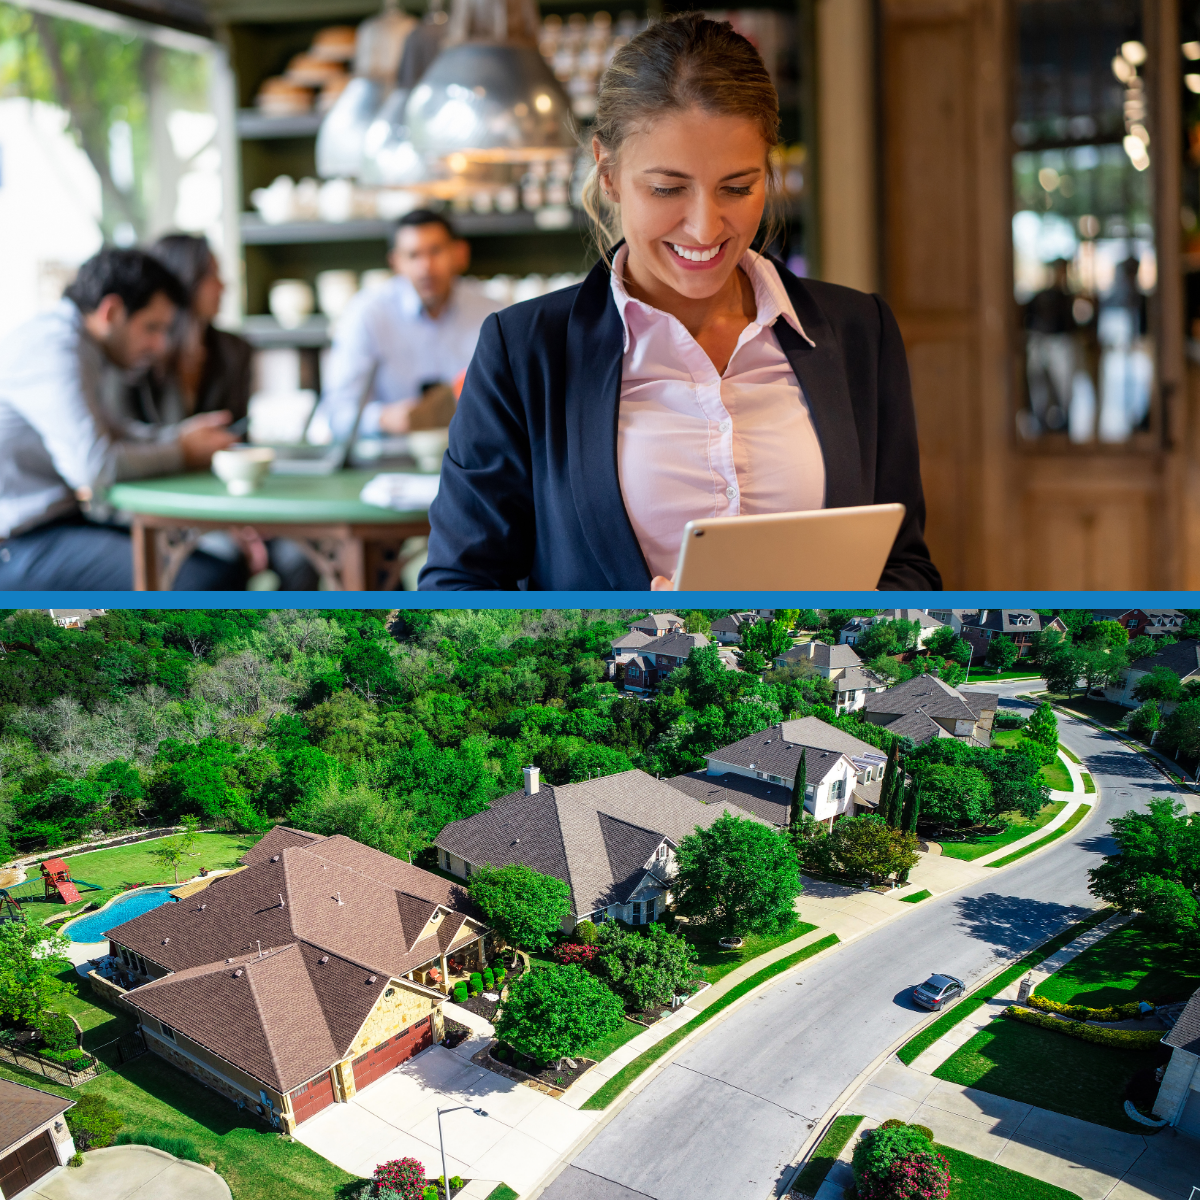 WRMC Blog Featured Image: Making the Most of Summer in a Planned Community: Thrive While Maintaining Standards